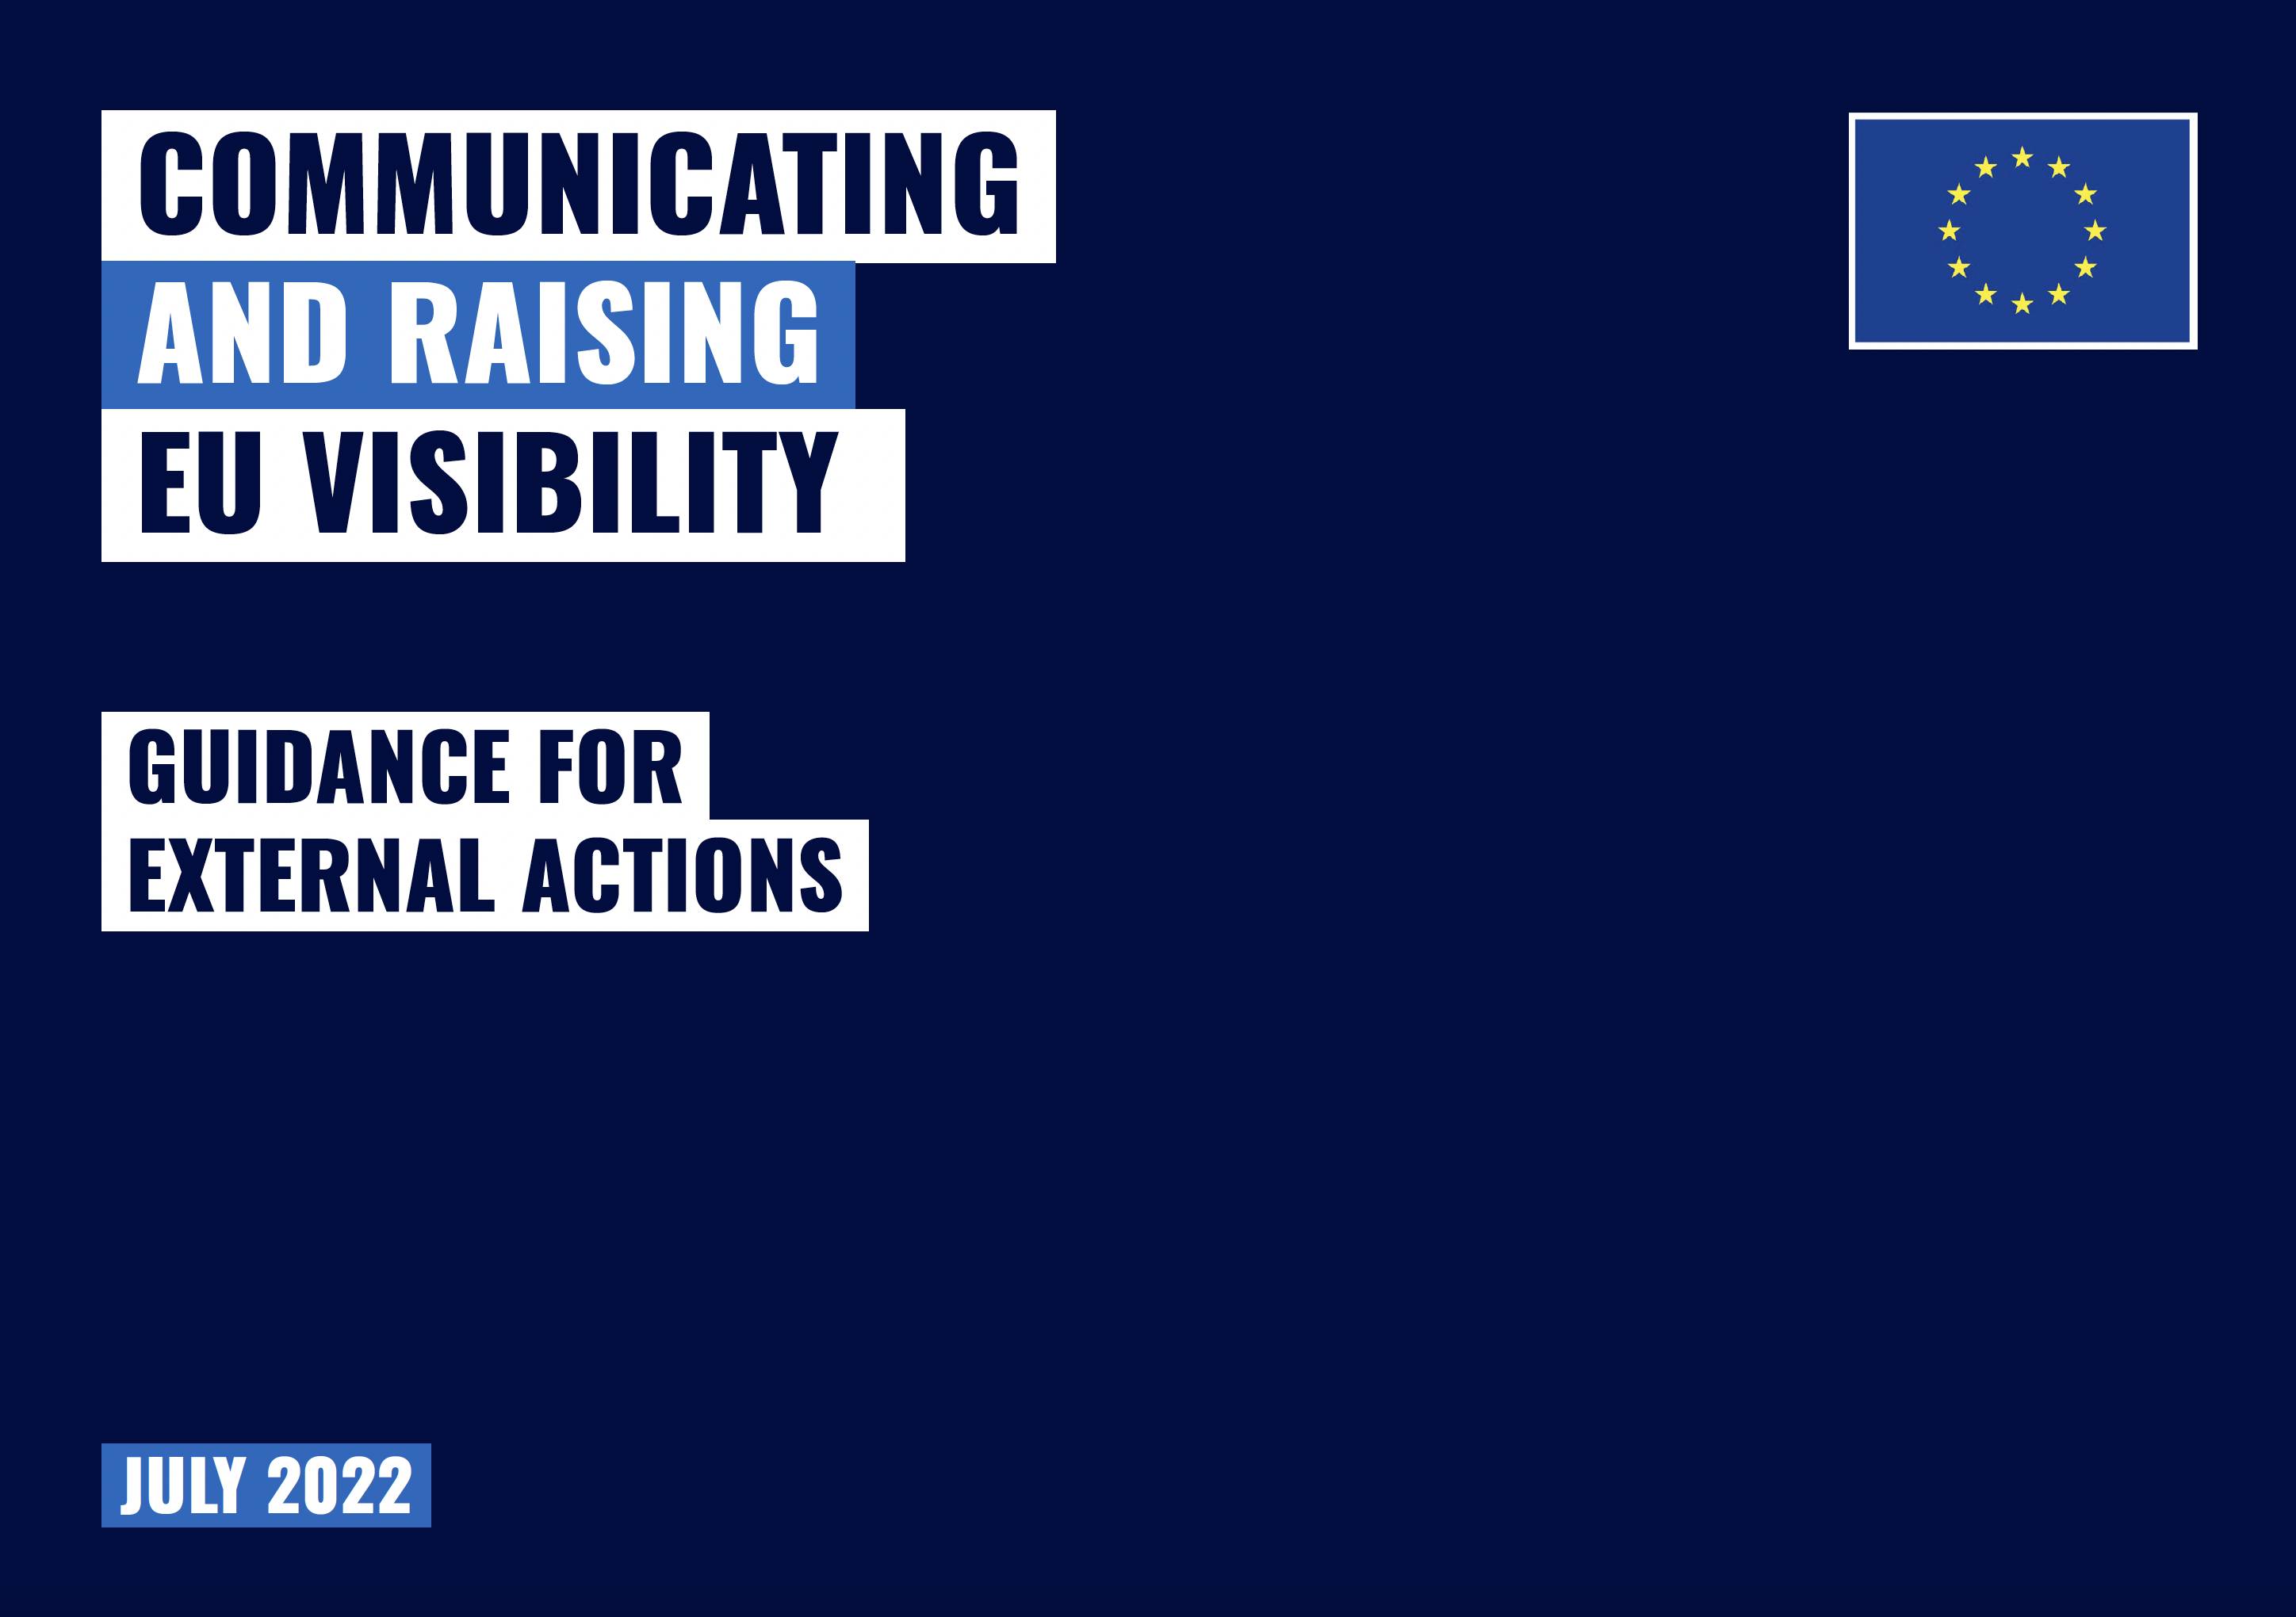 Communicating and Raising EU Visibility - Guidance for External Actions